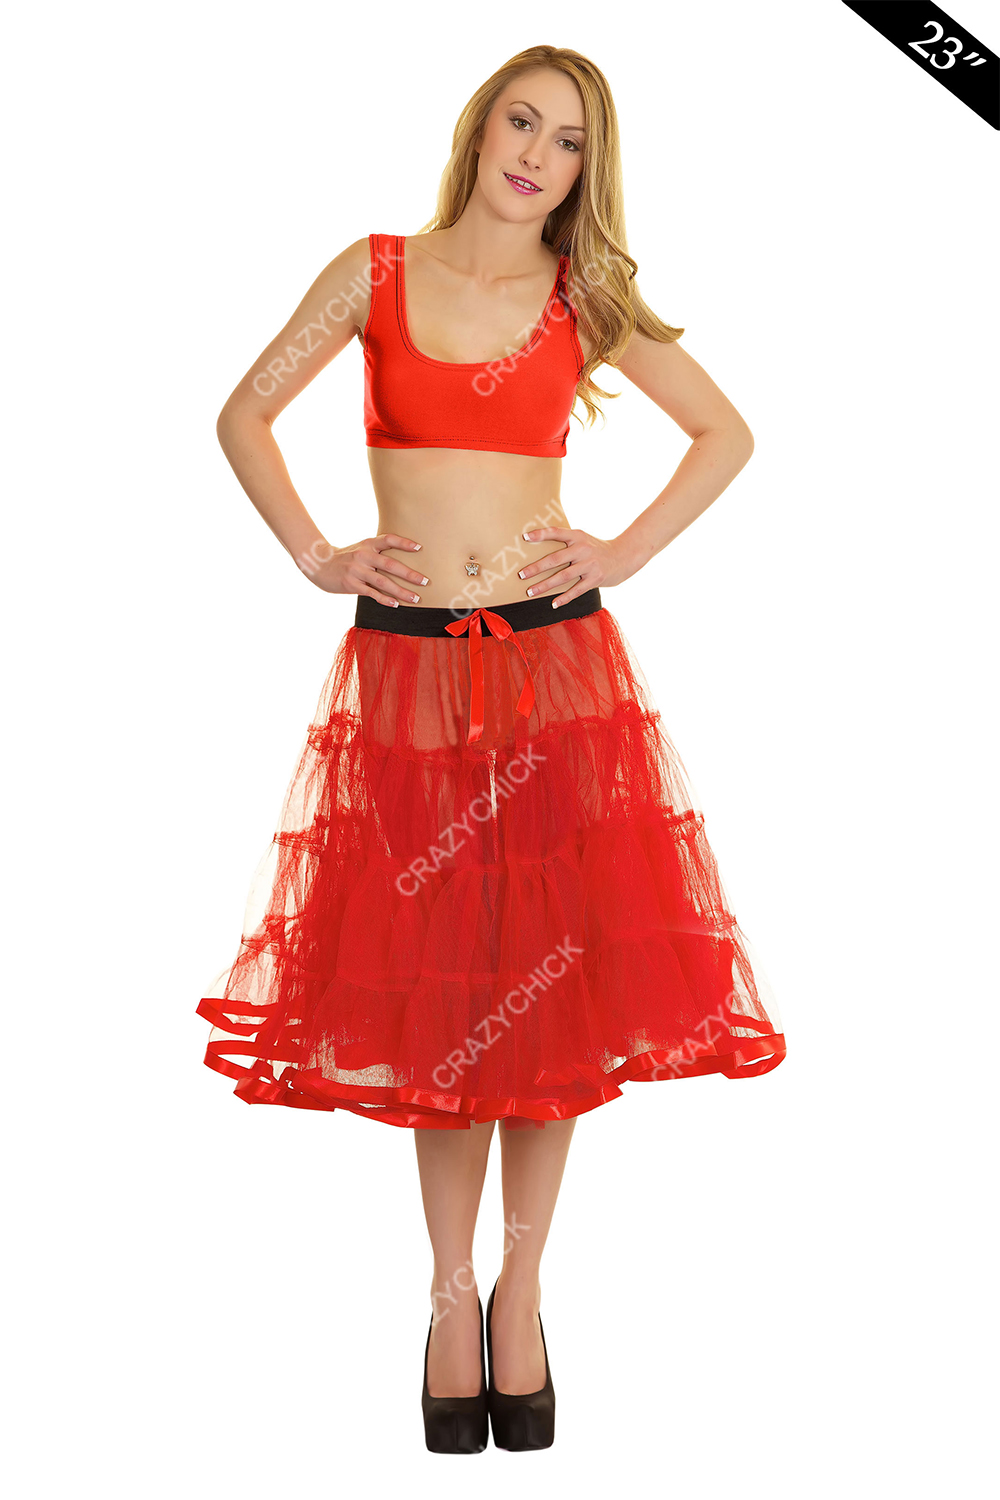 Crazy Chick Adult 4 Tier Petticoat with Ribbon Red Tutu Skirt (Approximately 23 Inches Long)